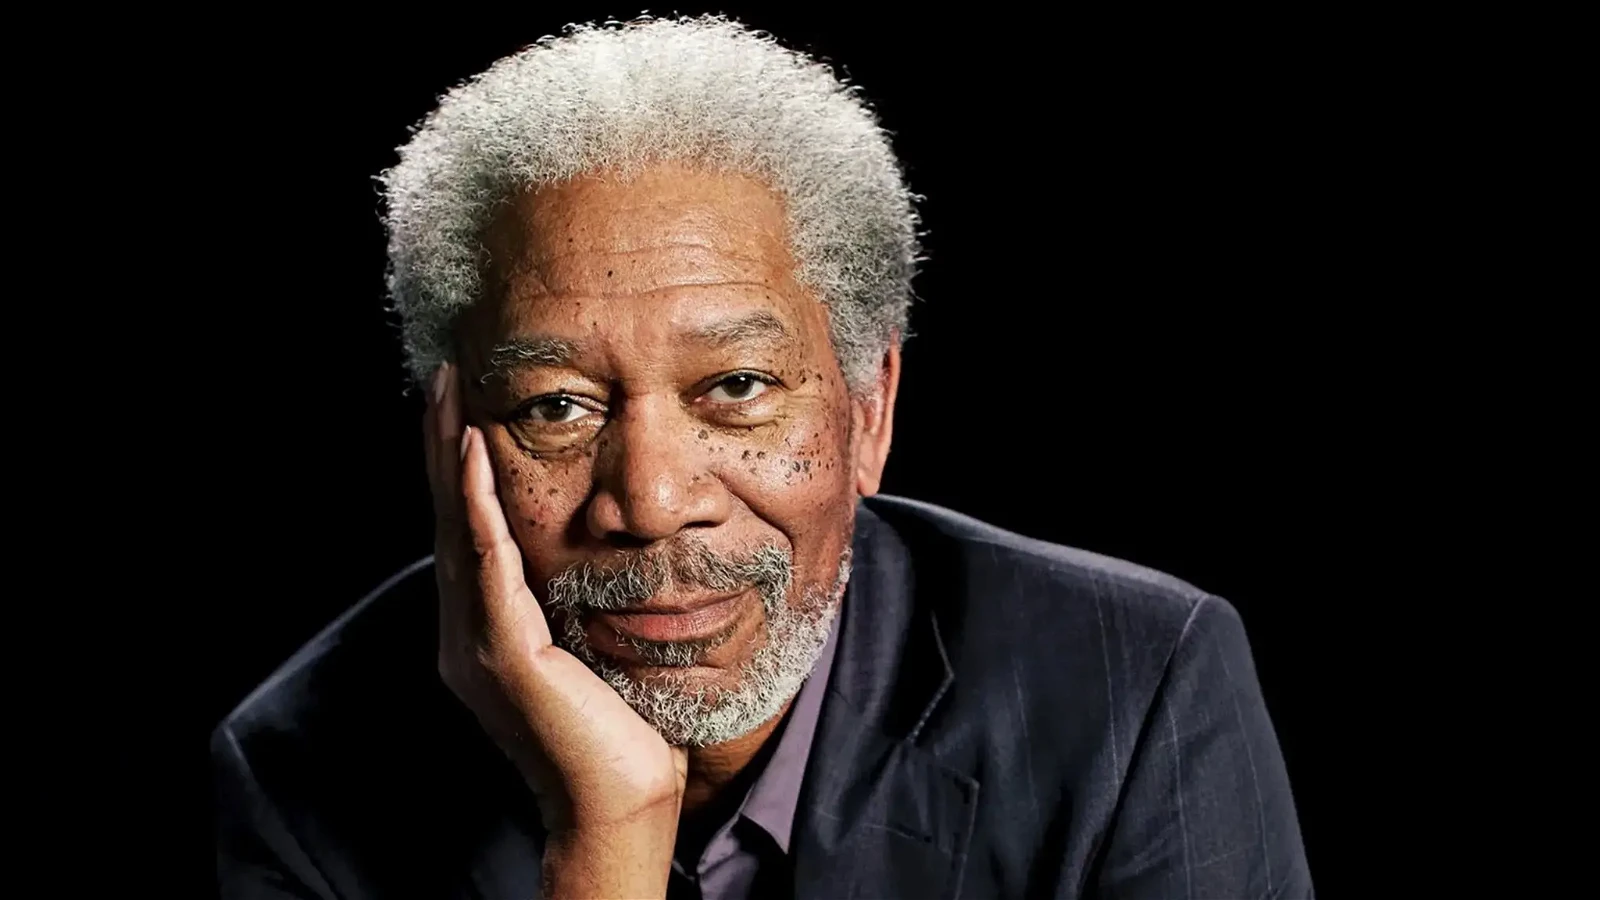 Morgan Freeman is one of the top Hollywood actors ever